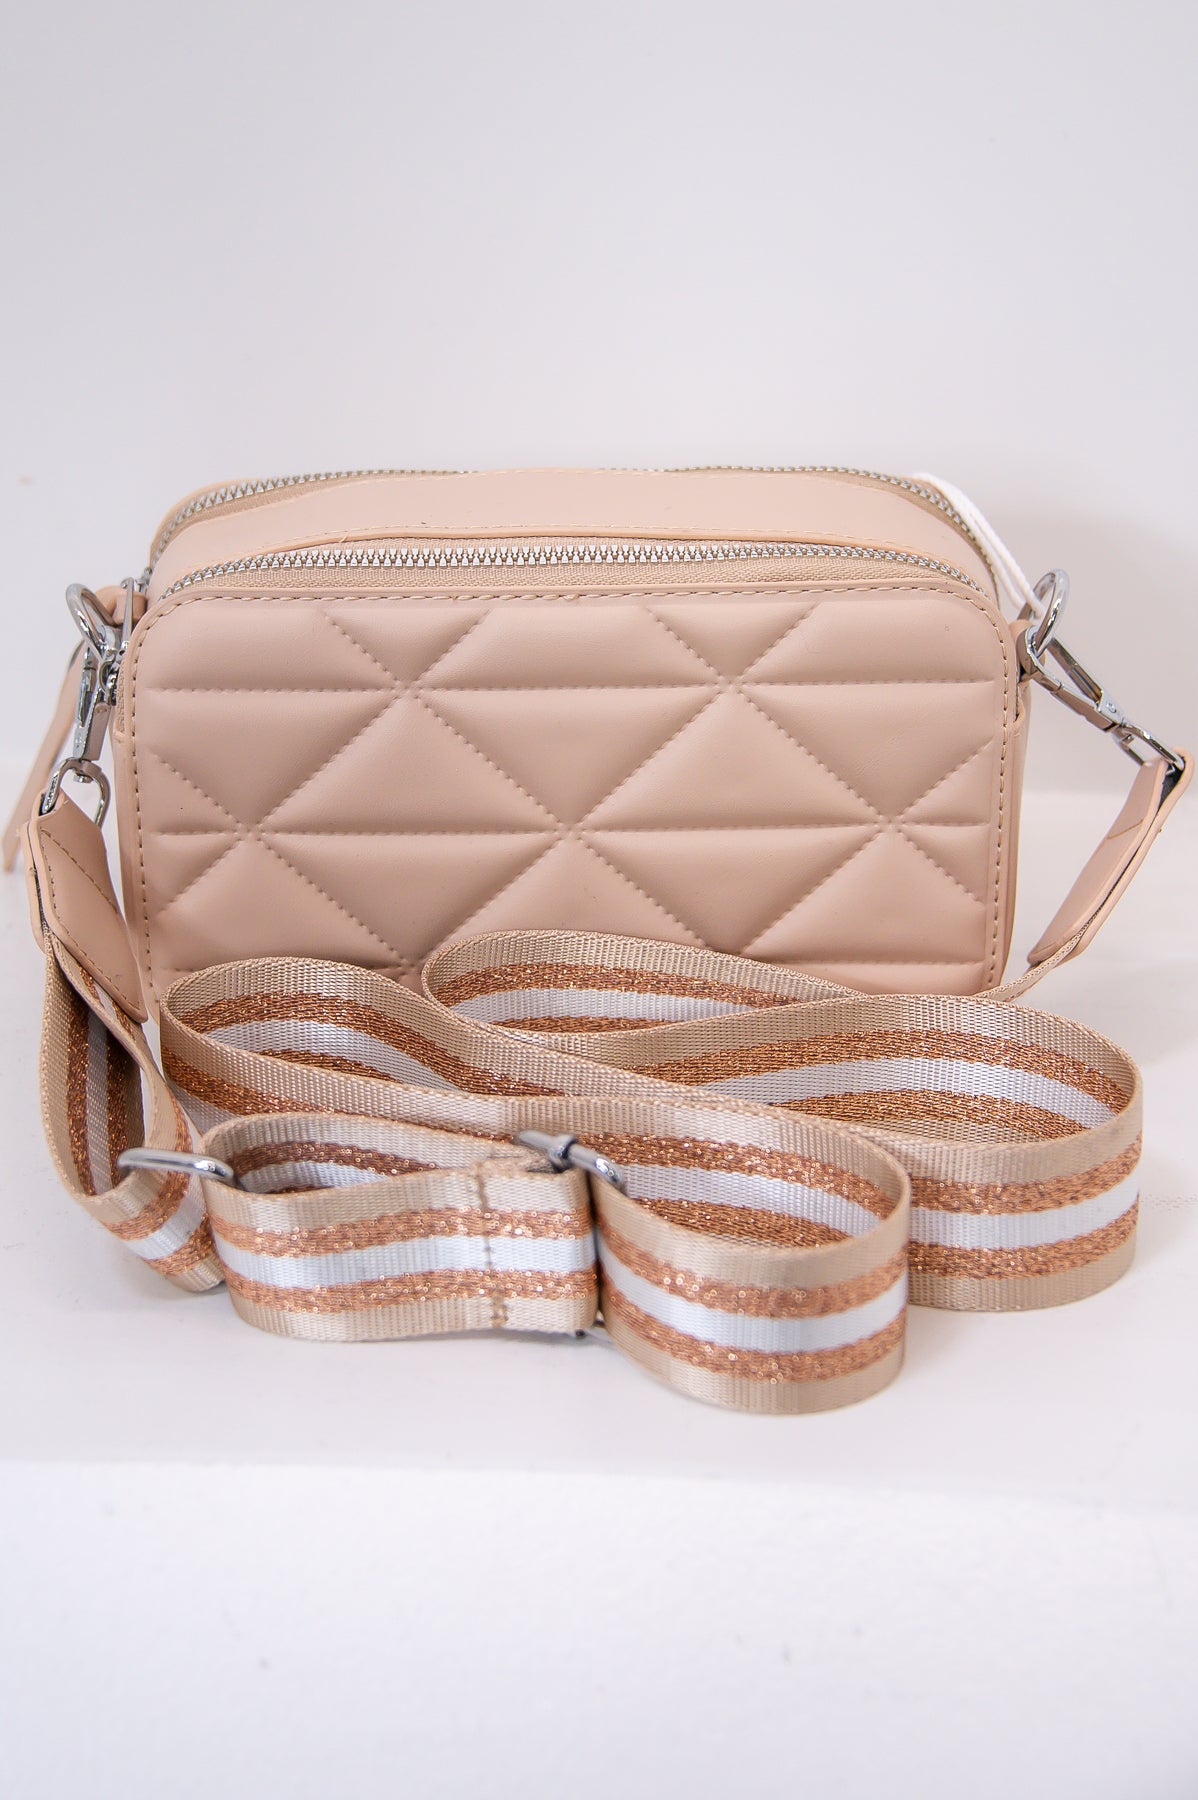 Give Me Hope Nude Solid Chevron Quilted Bag - BAG1861NU